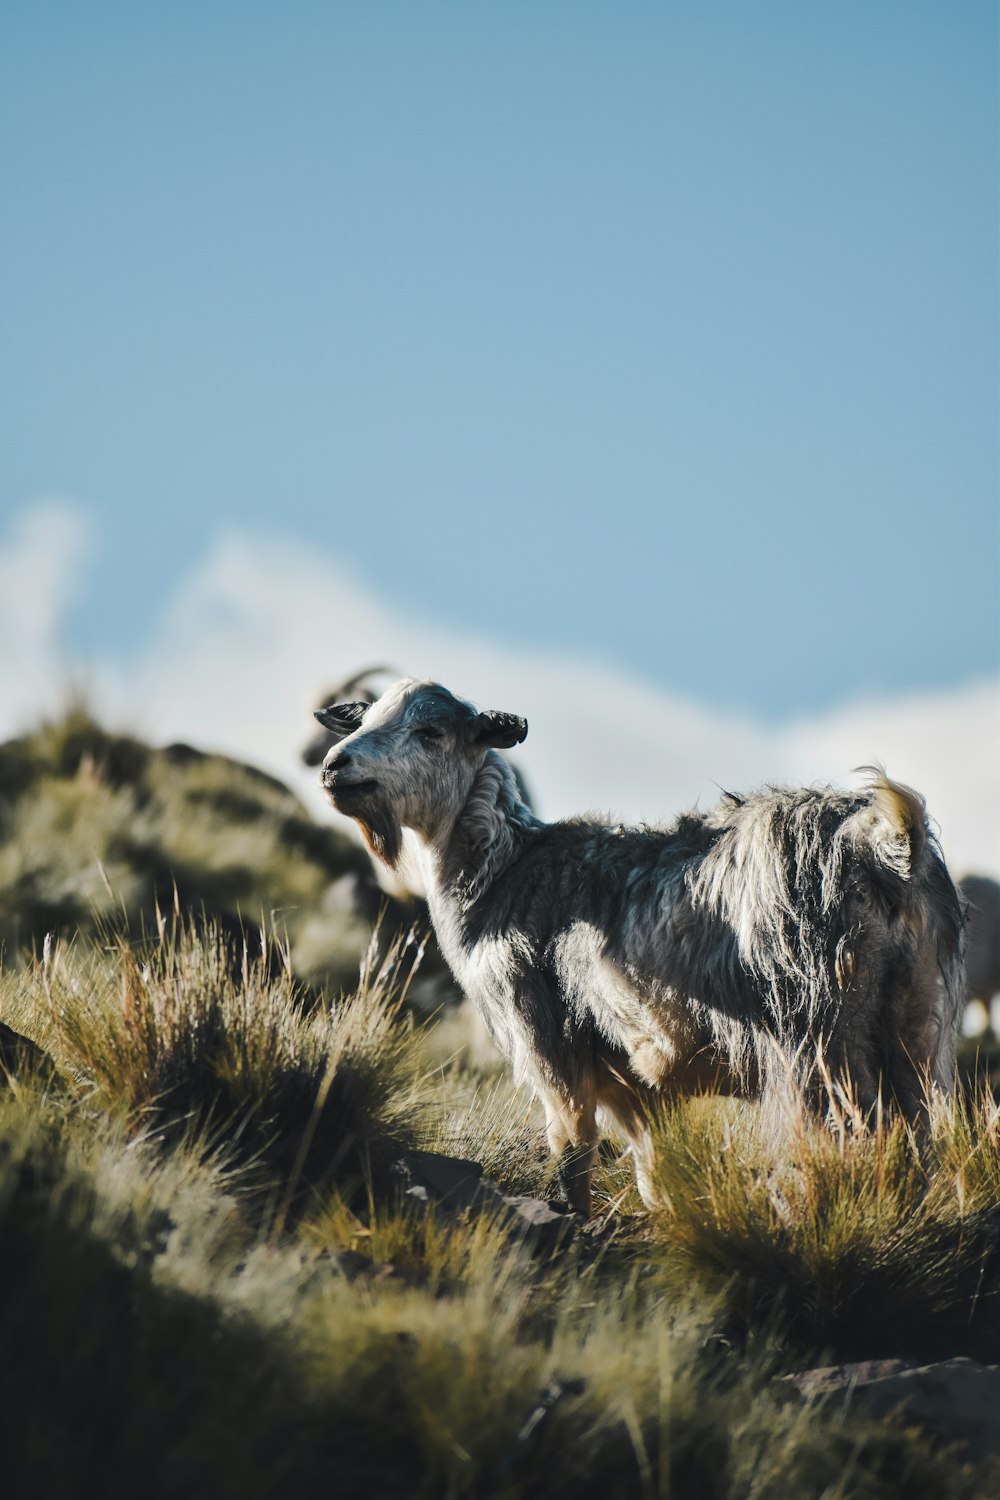 a dog standing on top of a grass covered hill